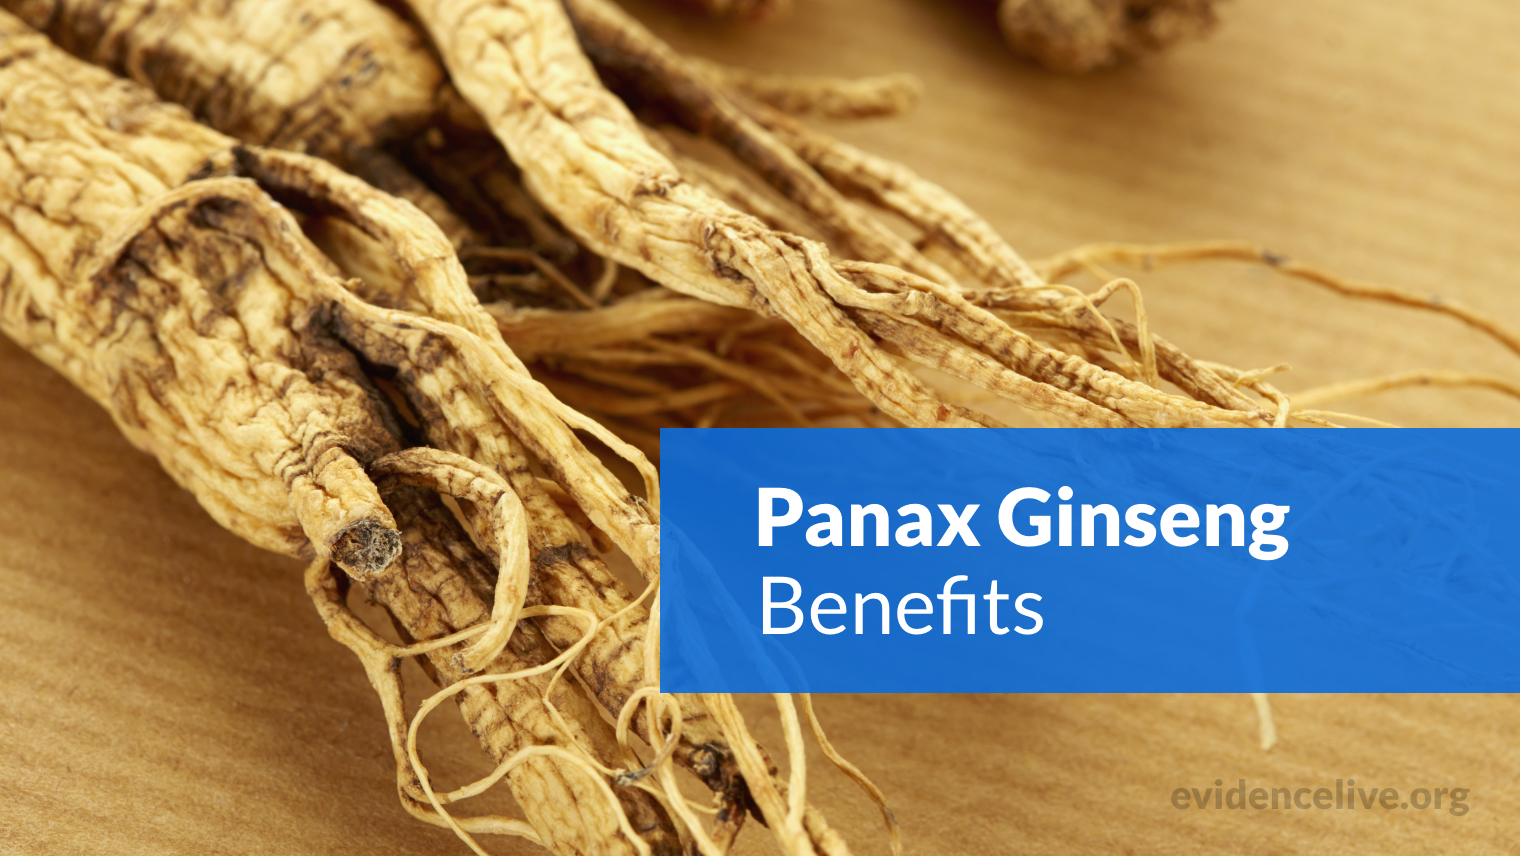 Panax Ginseng Benefits: What Does This Root Extract Do?